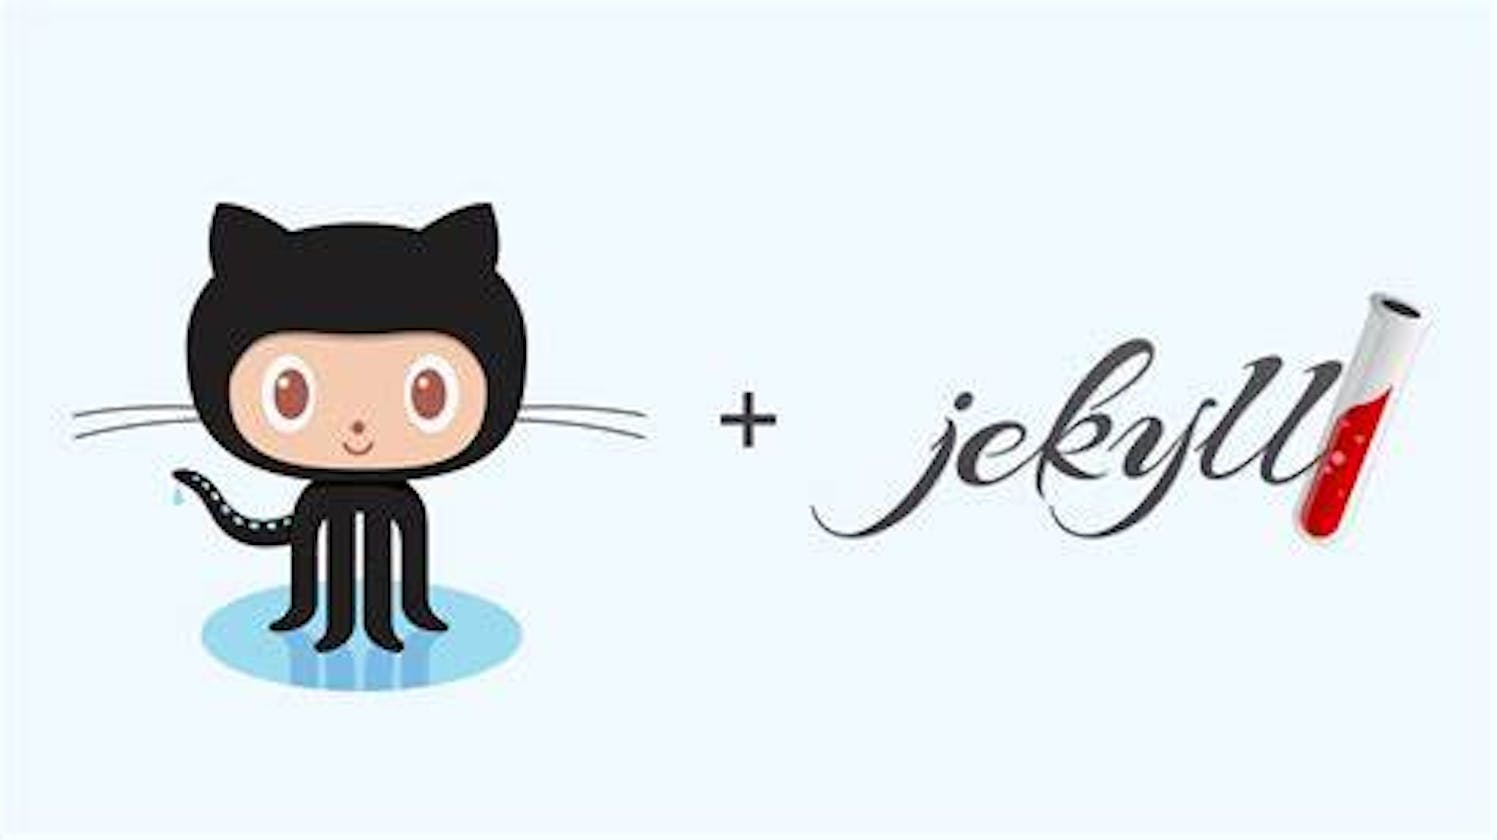 How am I blogging using Jekyll and GitHub pages from my Android phone